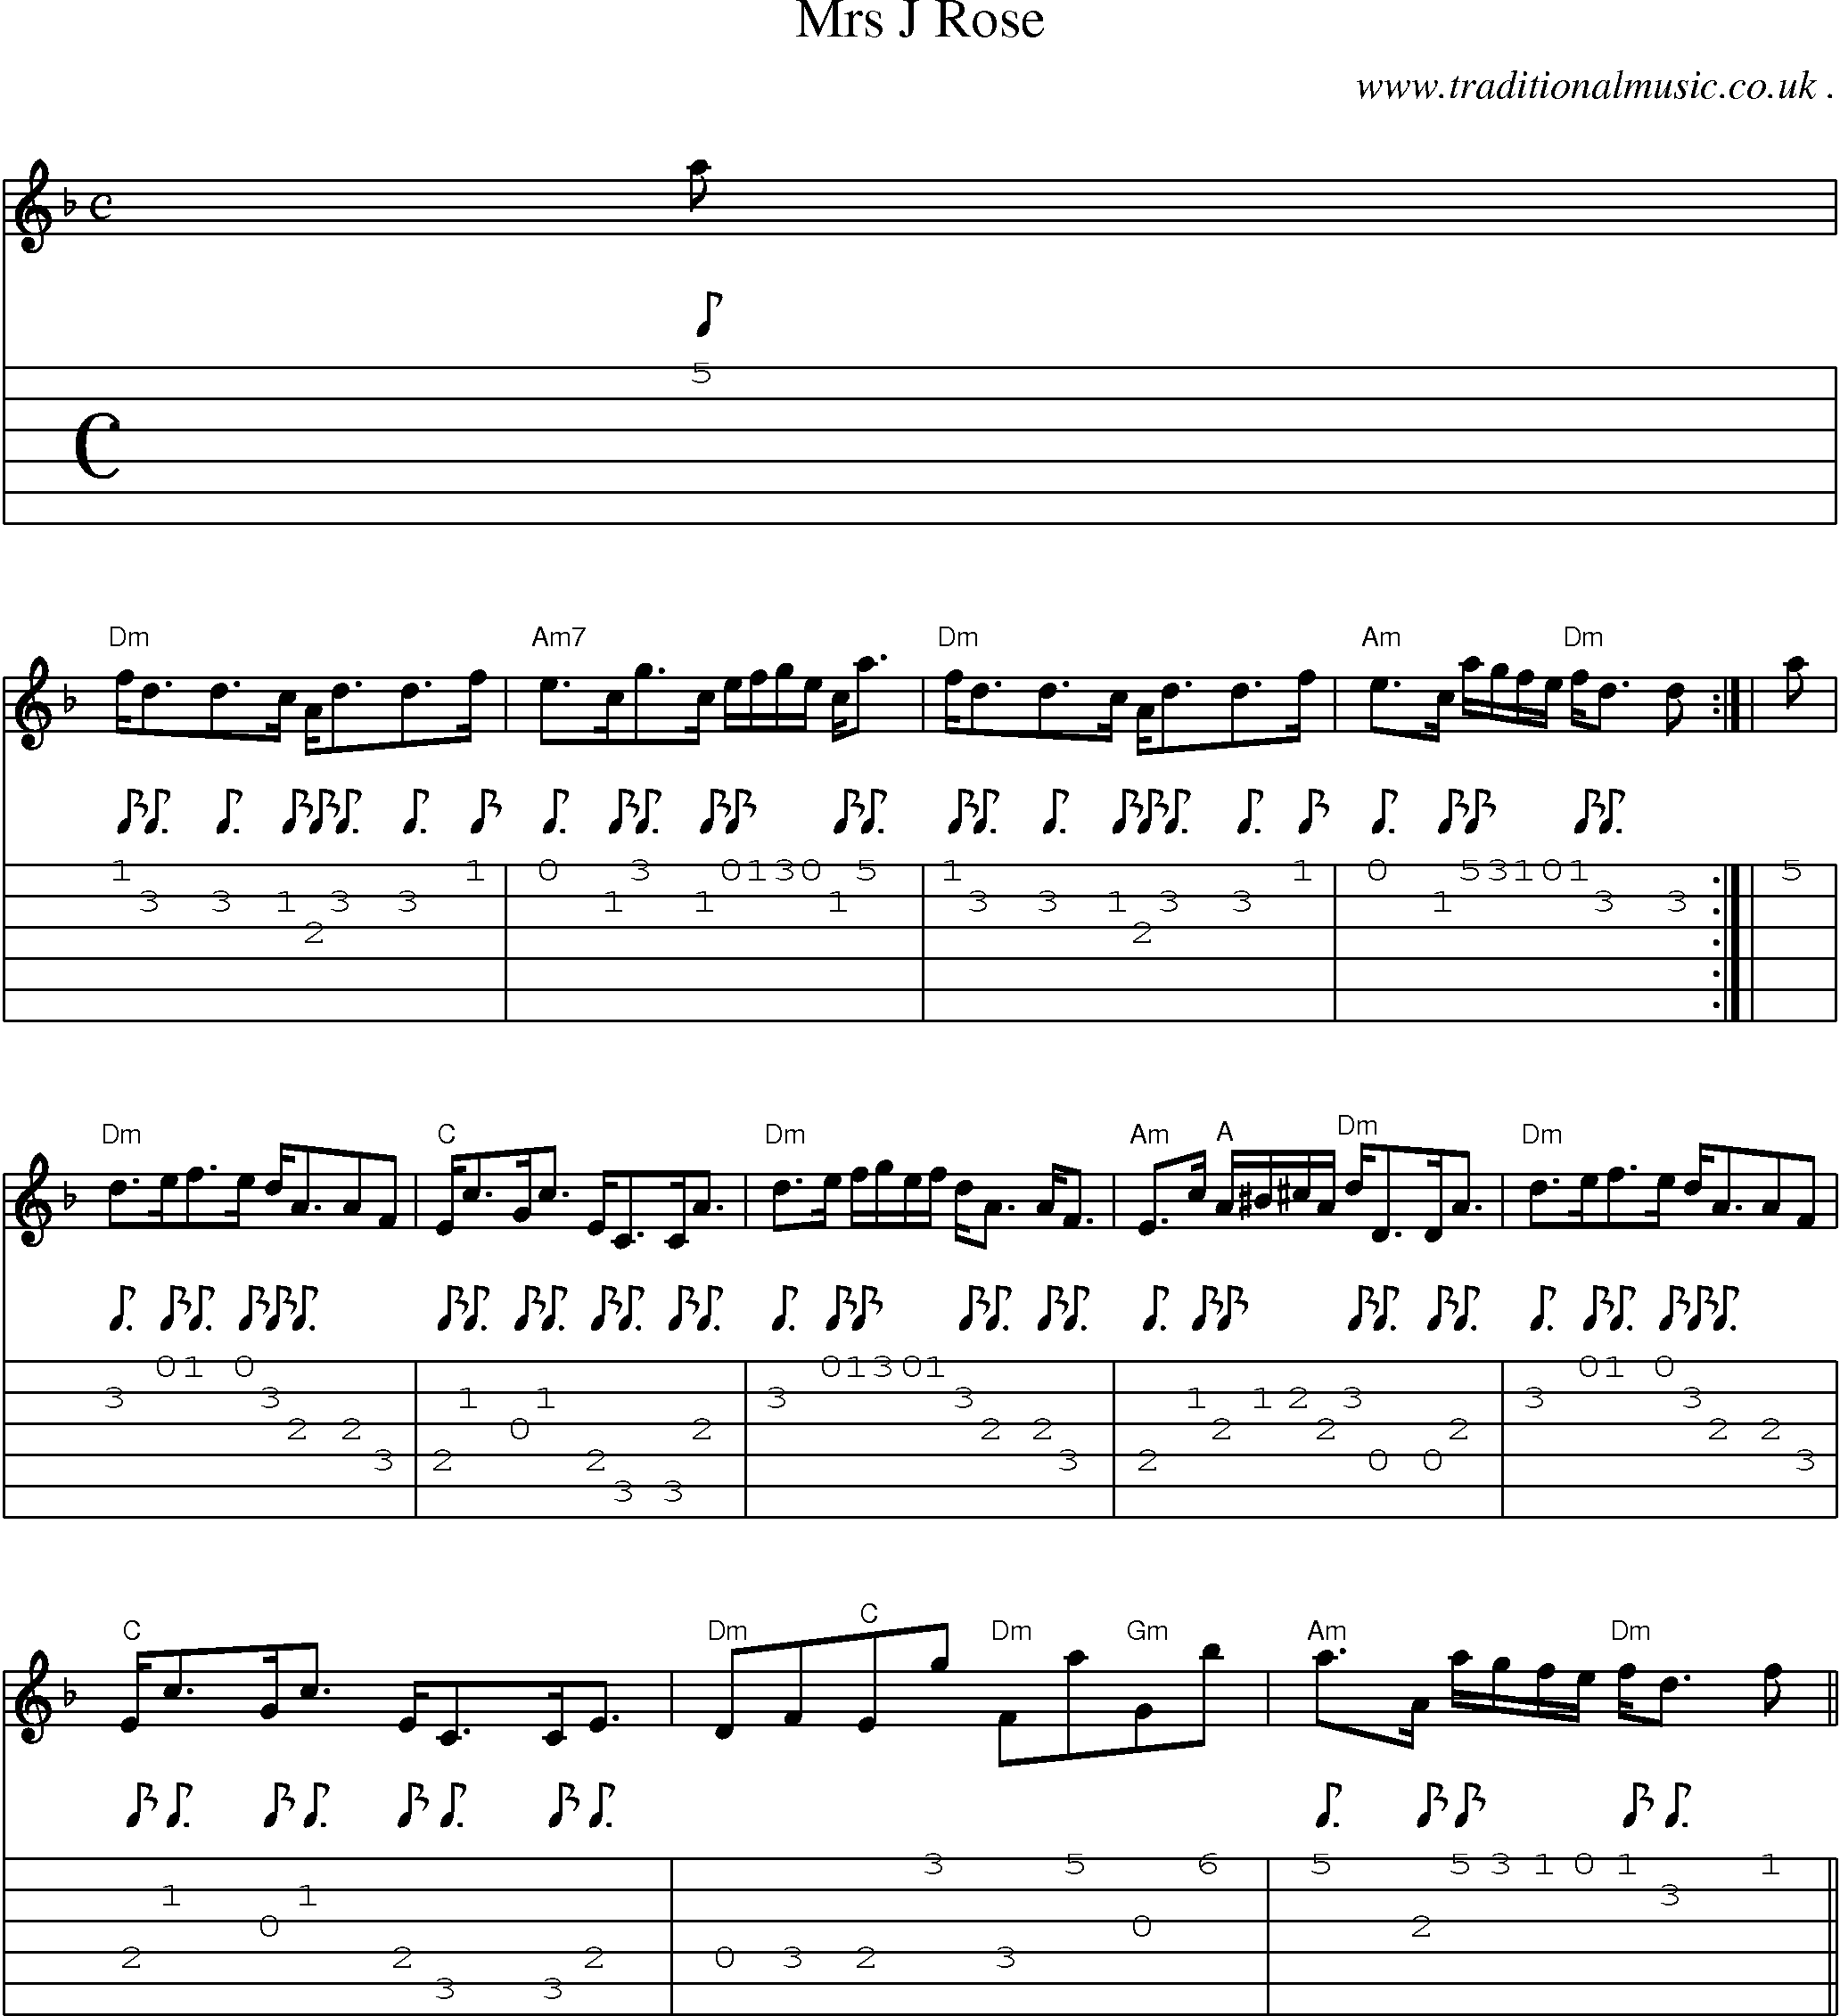 Sheet-music  score, Chords and Guitar Tabs for Mrs J Rose